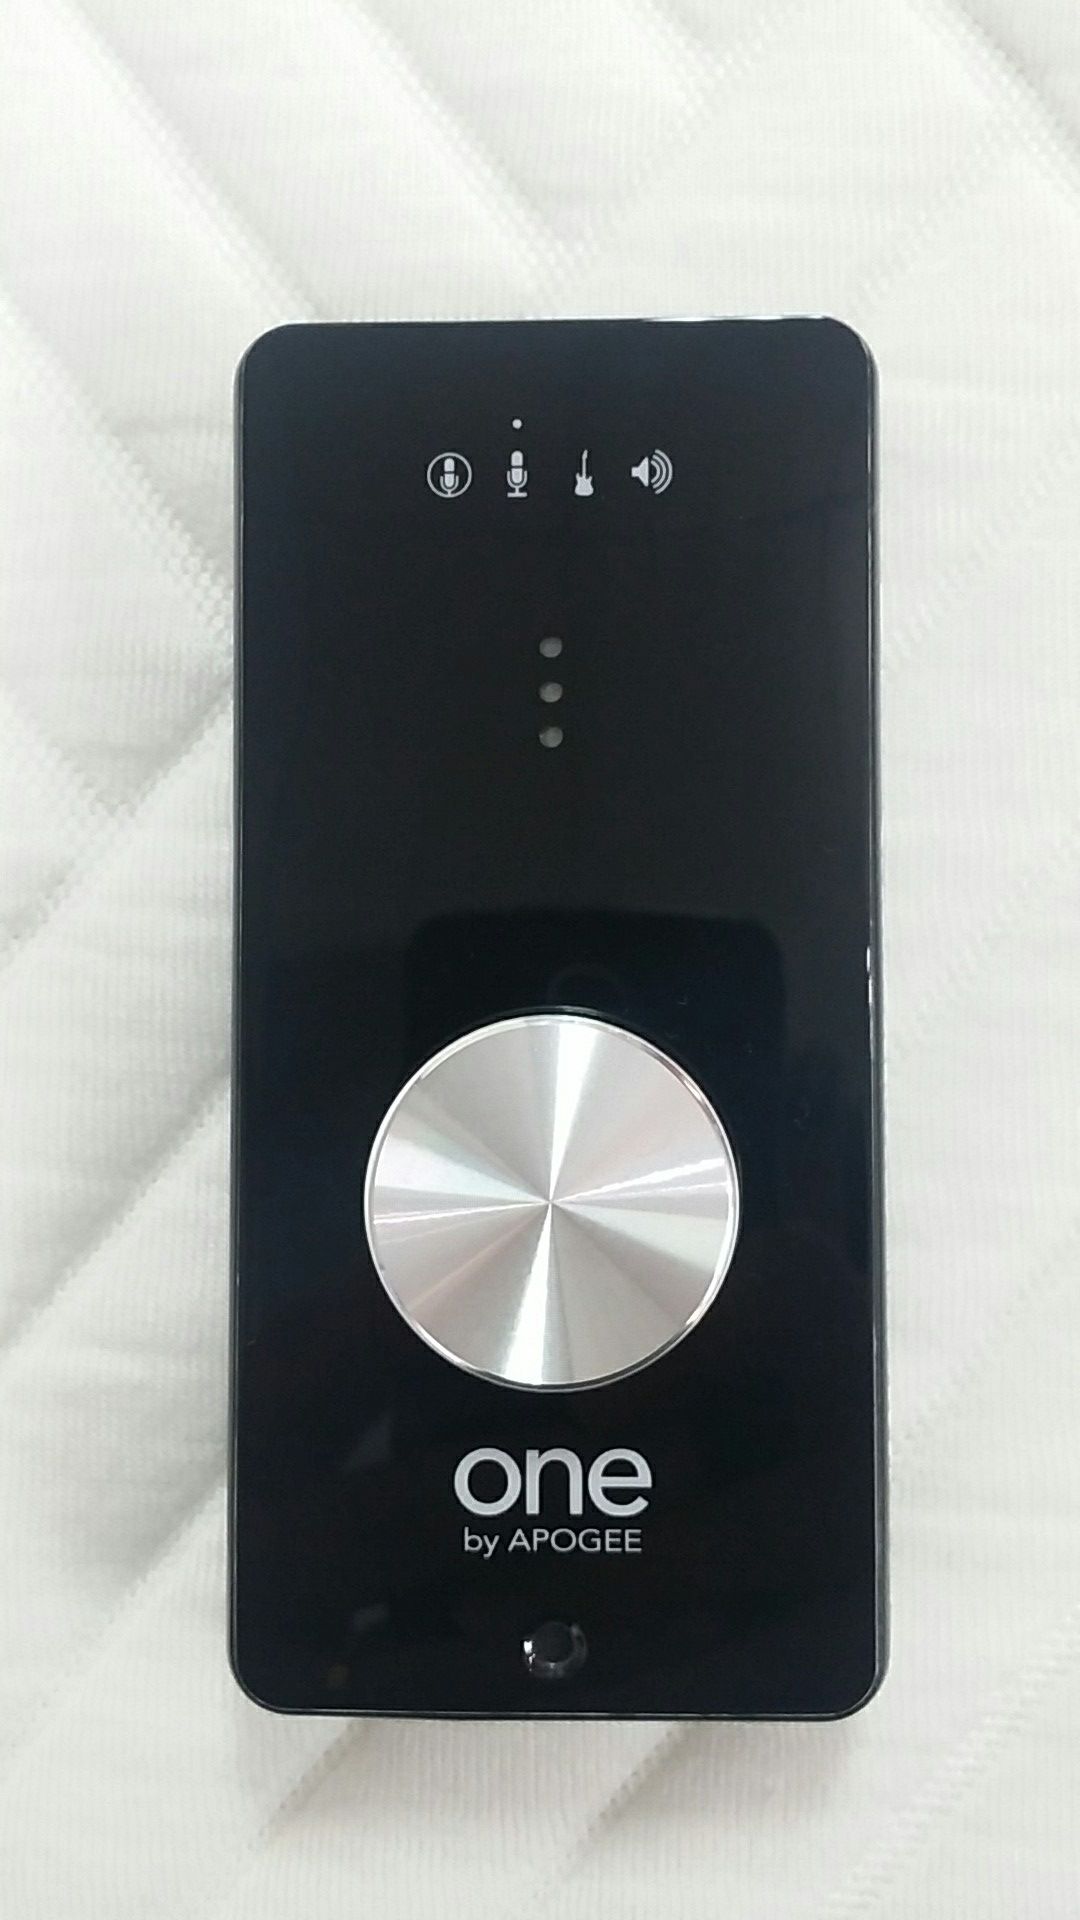 Apogee One for Mac $100